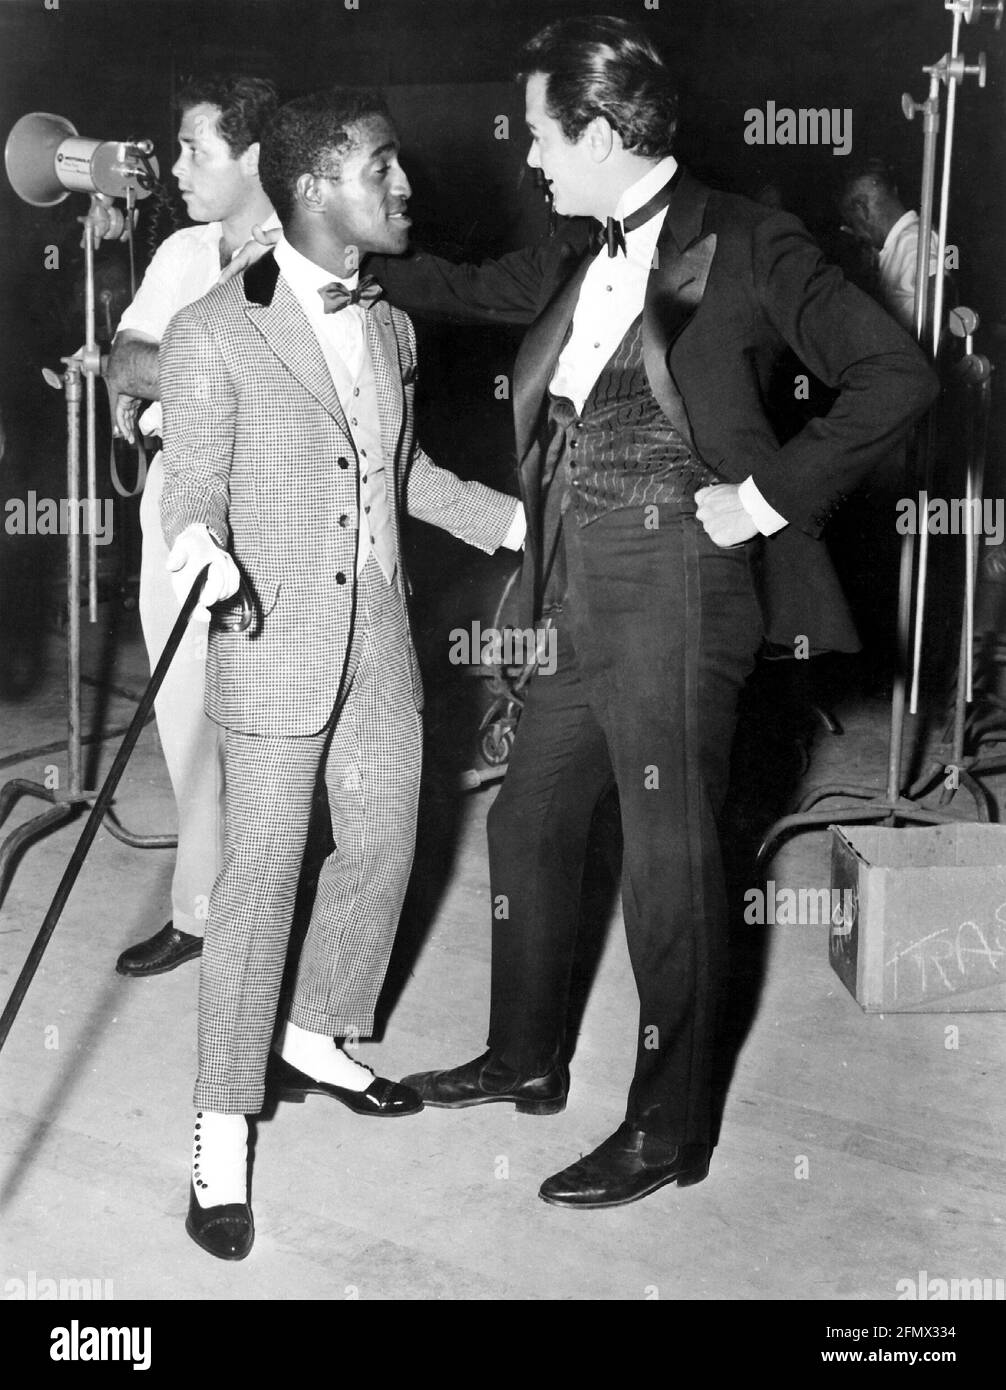 Davis, Sammy Jr., 12.8.1925 - 16.5.1990, American Entertainer, full length, with Tony Curtis, 1960s, ADDITIONAL-RIGHTS-CLEARANCE-INFO-NOT-AVAILABLE Stock Photo